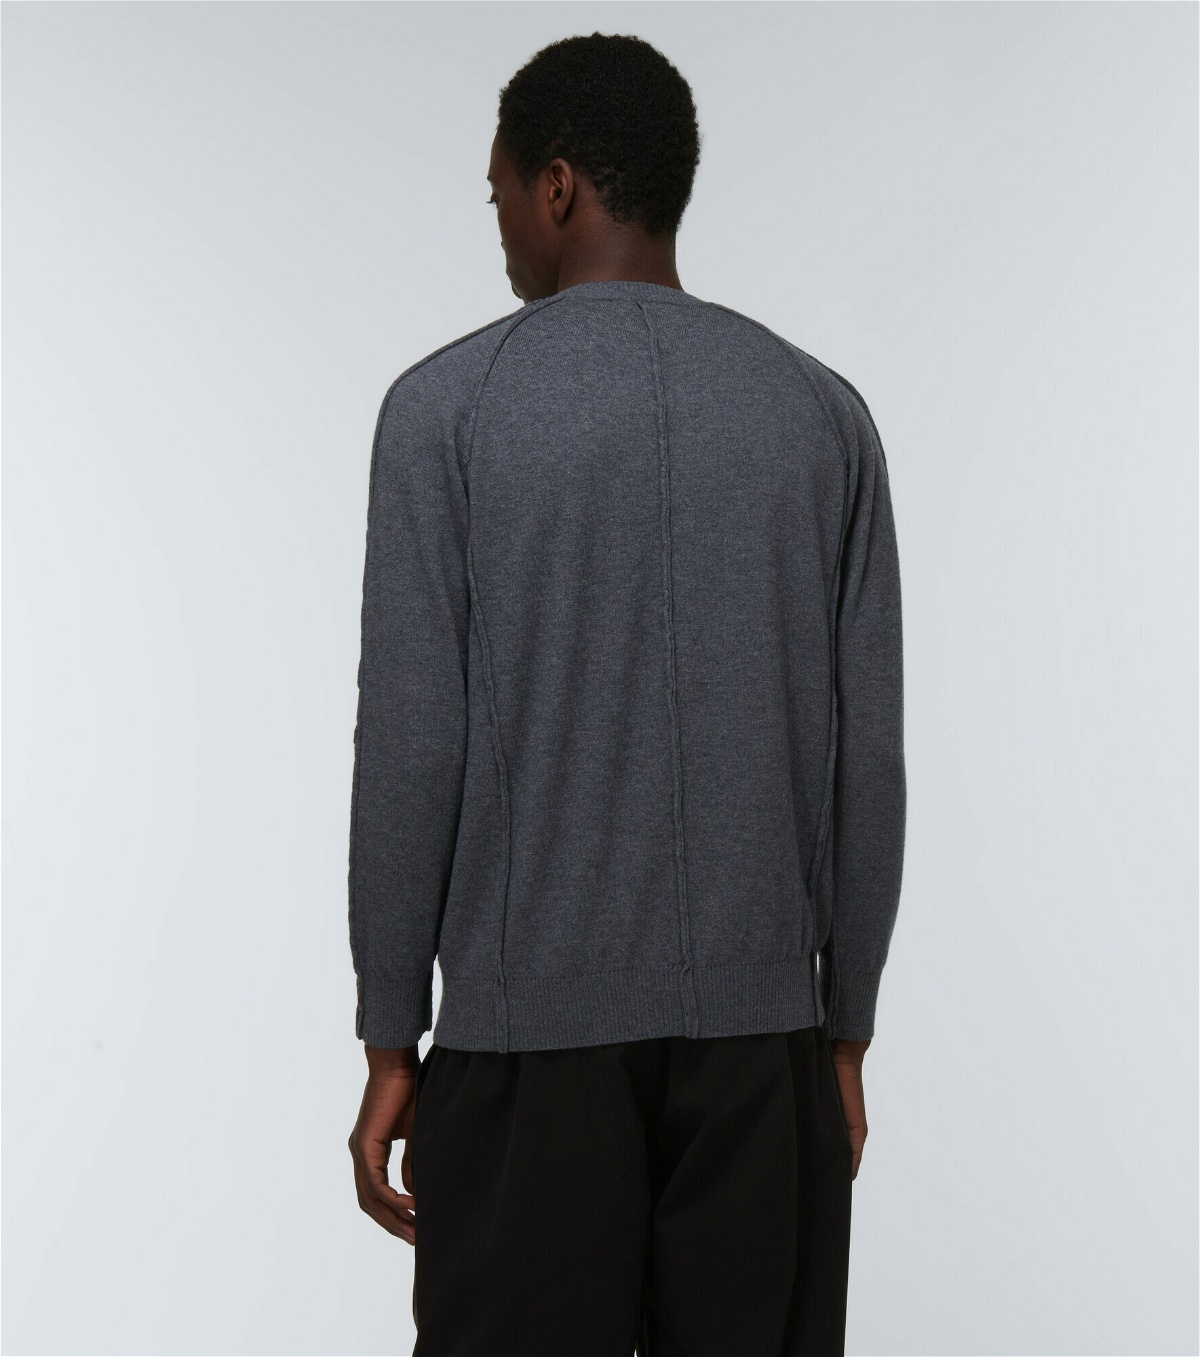 Undercover - Wool sweater Undercover